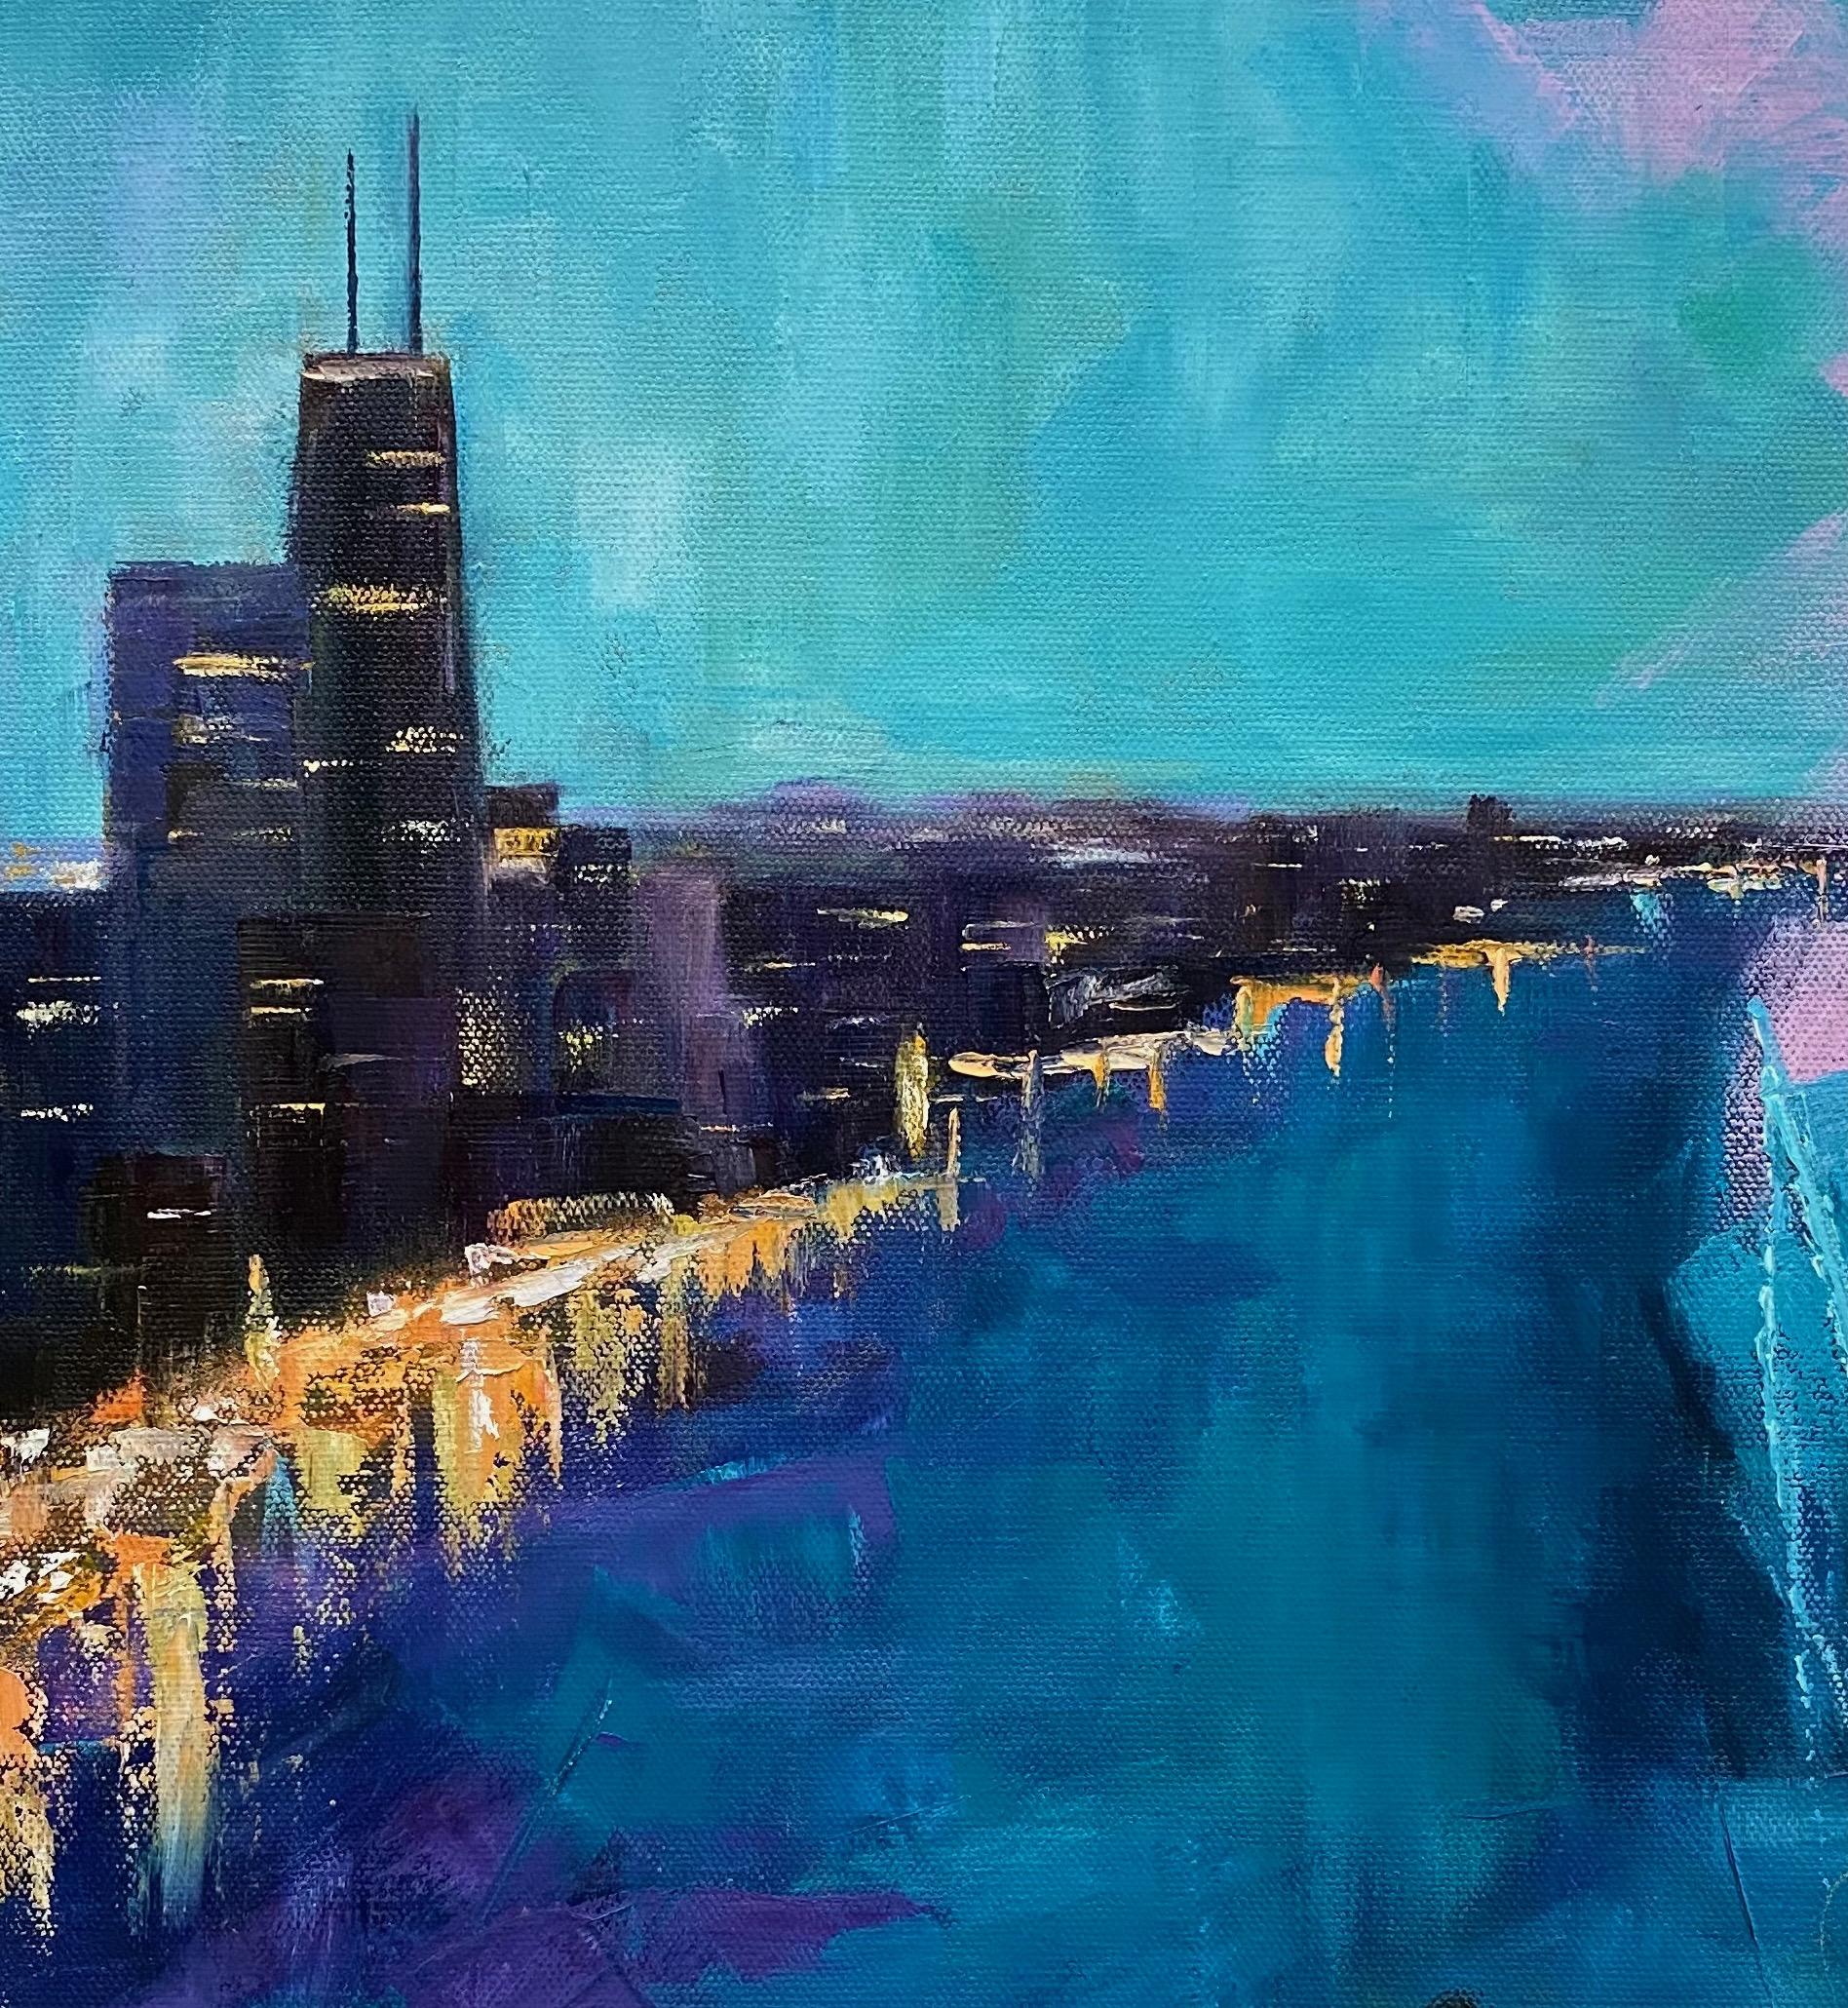 <p>Artist Comments<br />Beckoning lights flicker, their reflections stretching on calm blue waters. Artist Yangzi Xu blends realism with abstraction in this compelling lakeside depiction of the Chicago skyline. “I wanted to explore the drama of